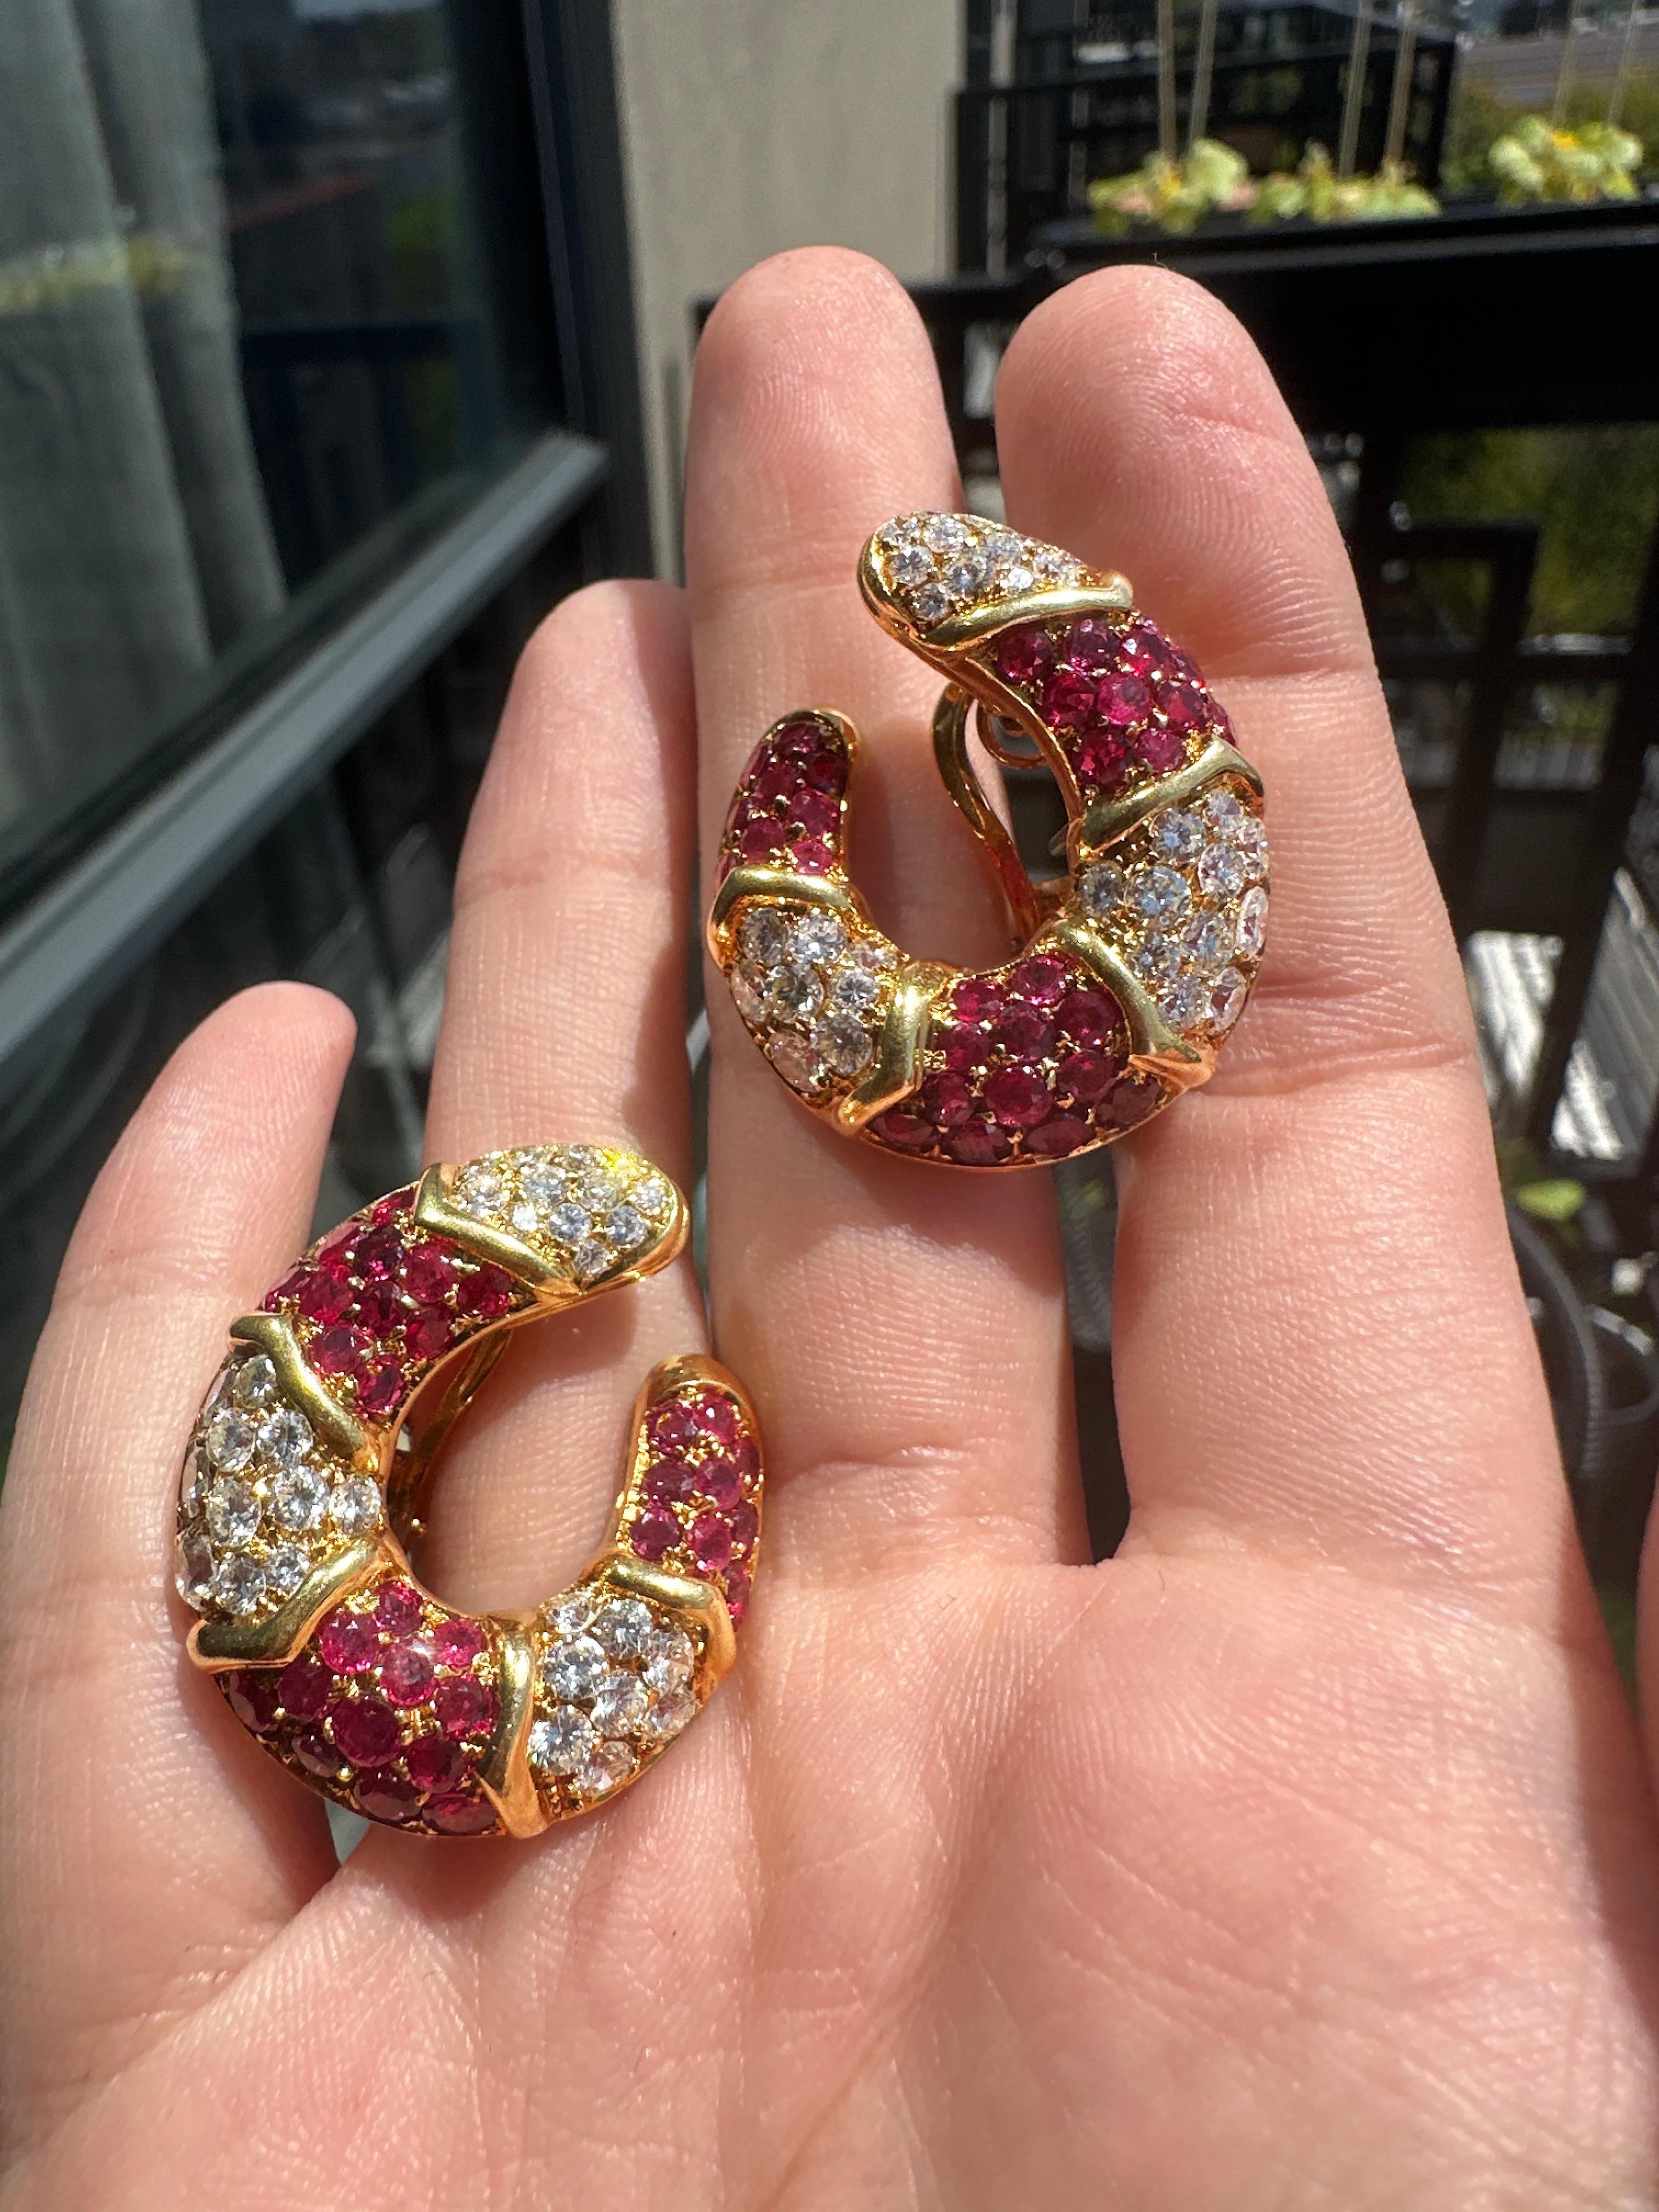 Add a touch of vintage glamour to your look with our 18k Italian Made Estate Diamond and Ruby Earrings! Crafted in the1960's, these earrings feature a stunning combination of 4.50 carats of diamonds and rubies set in 18k yellow gold. With a length